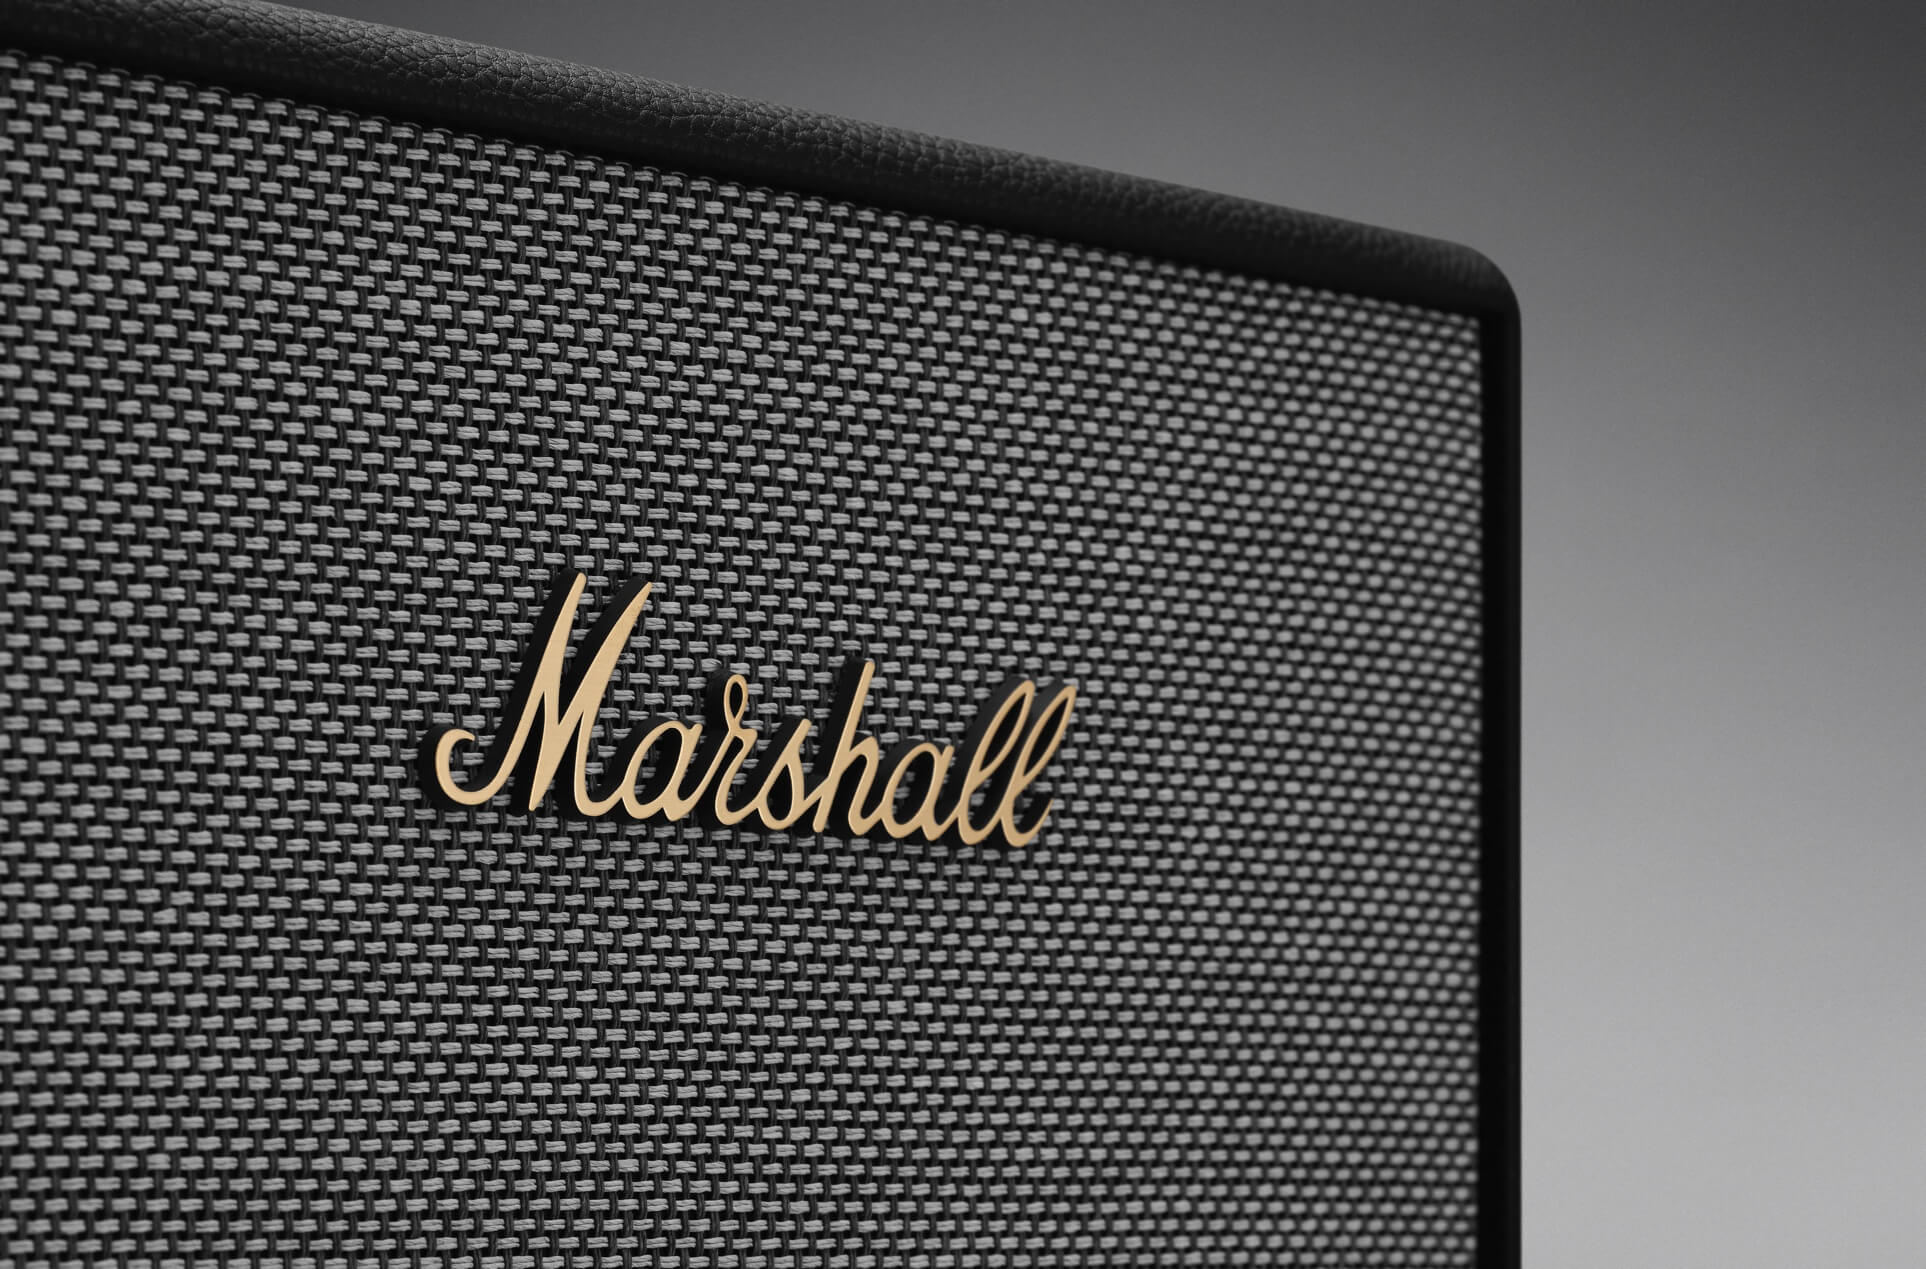 Marshall Stanmore II Speaker review: Classic in form, versatile in function  - DXOMARK